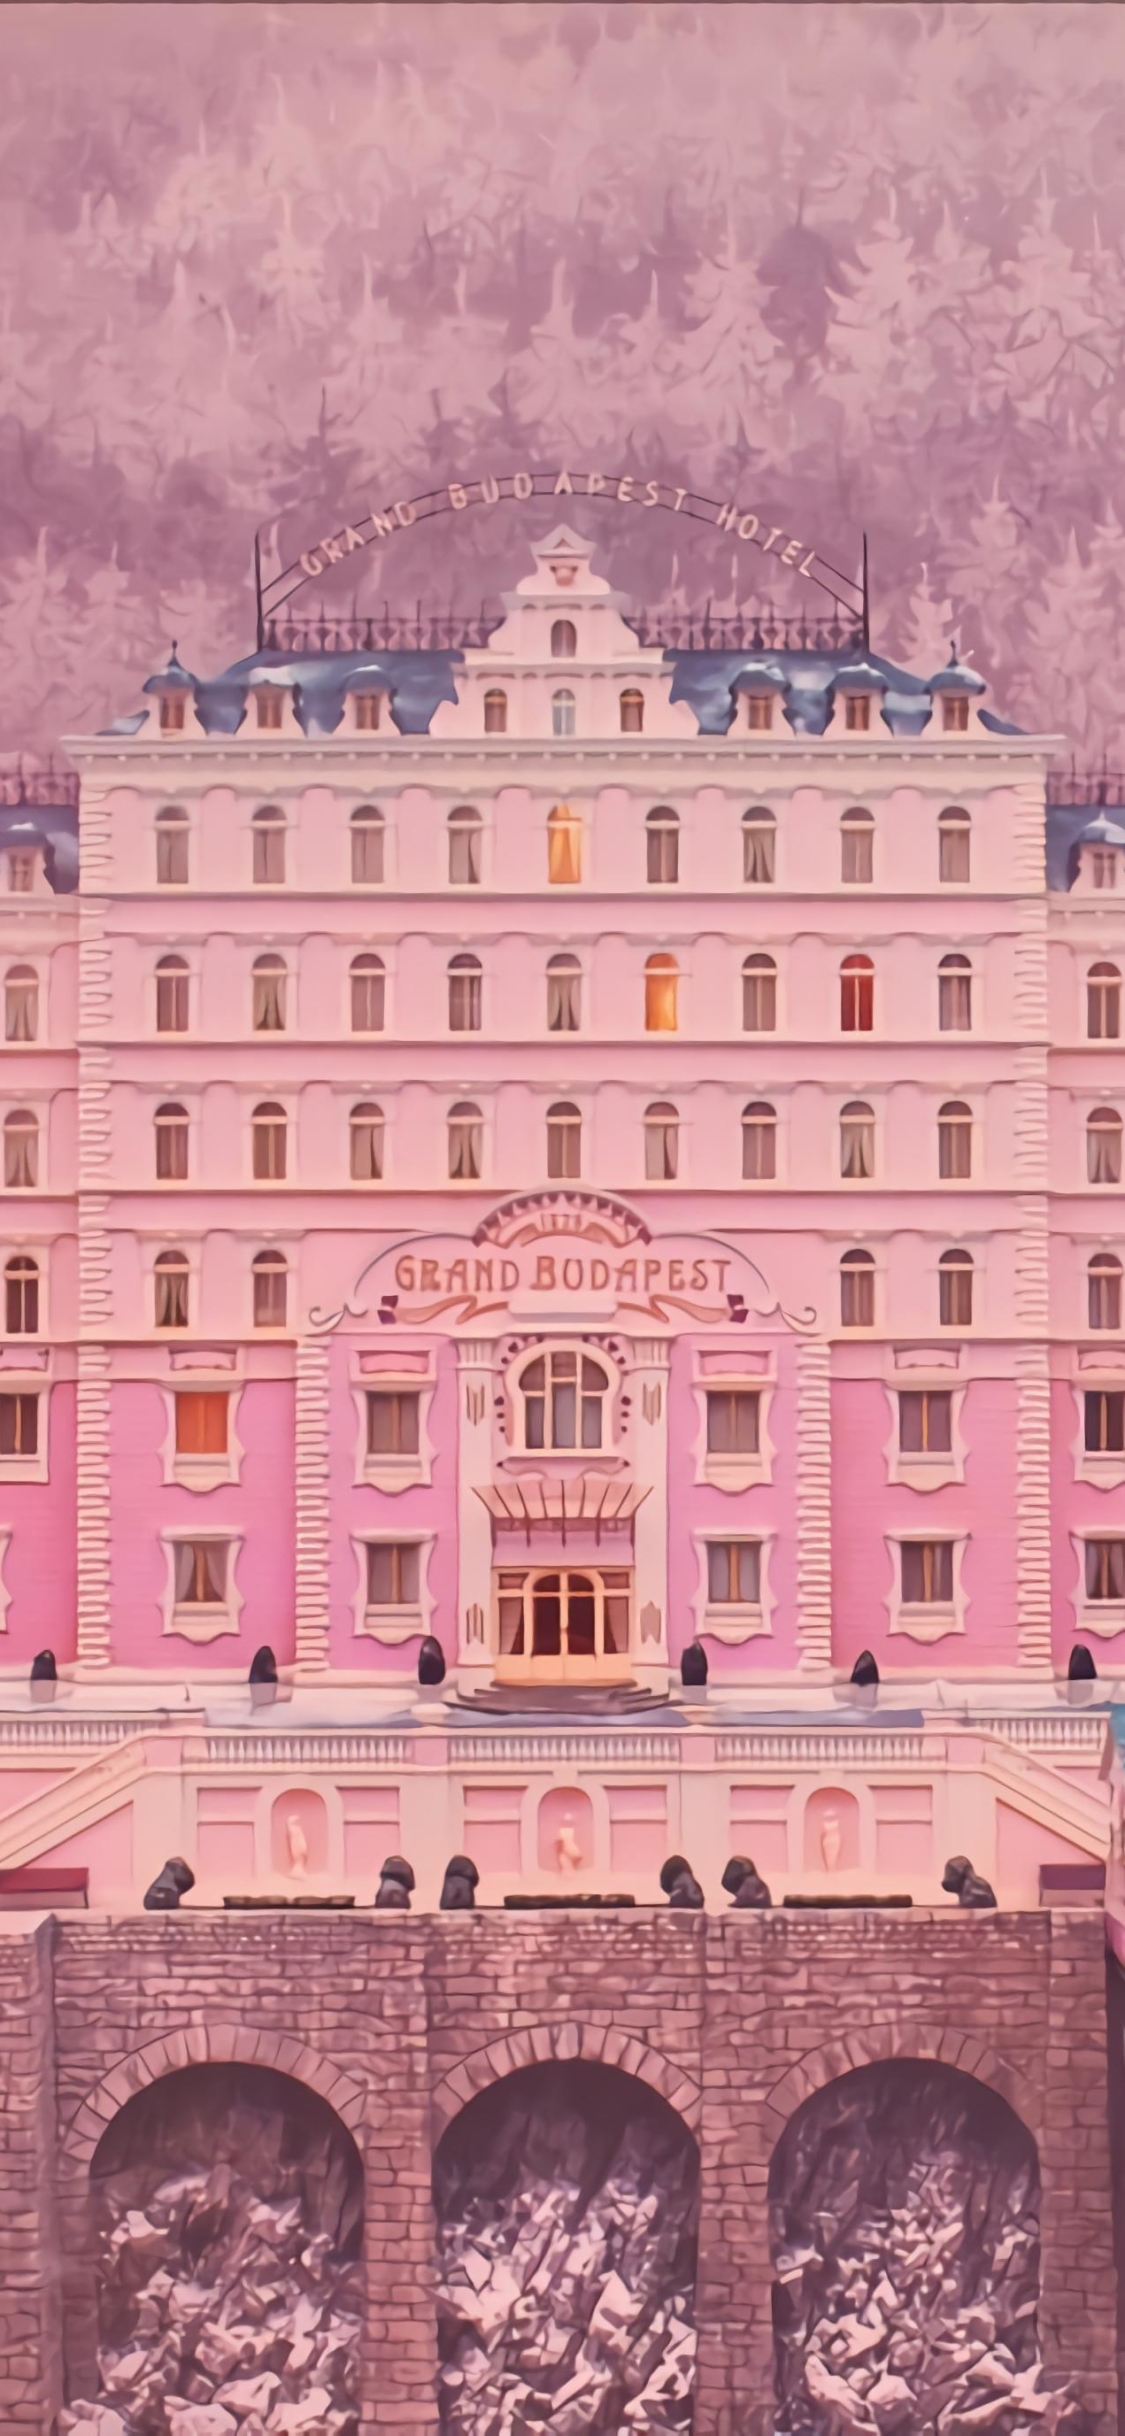 the grand budapest hotel, movie, hotel, pink